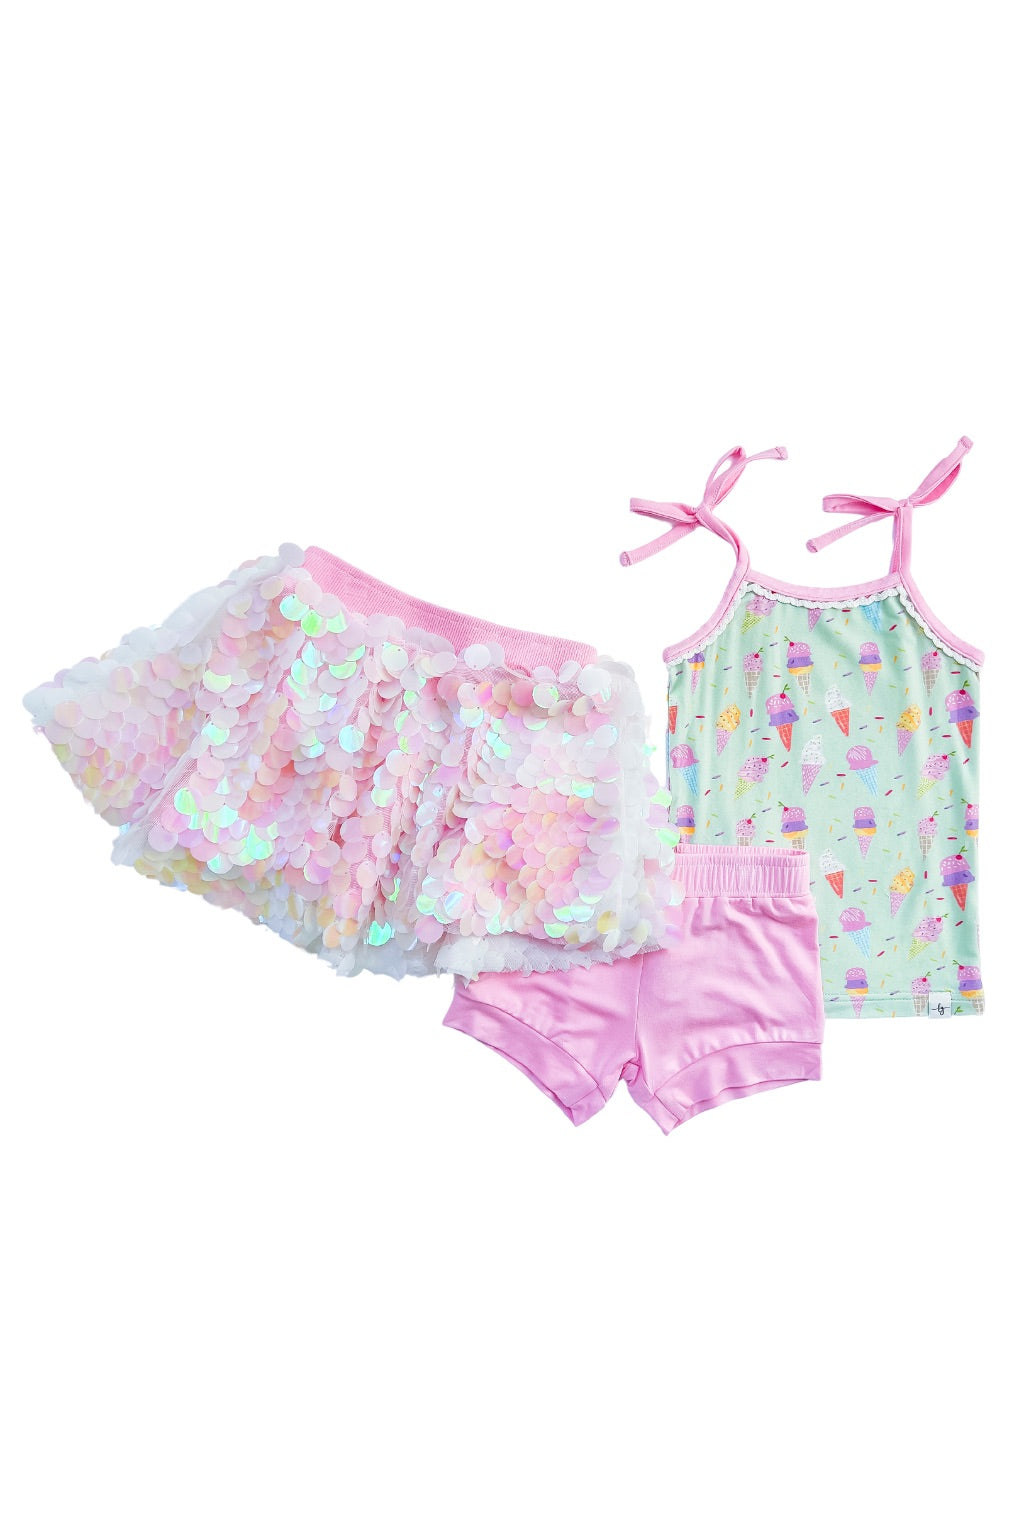 Scoop Me Up Comfort Set with Sparkle Skirt